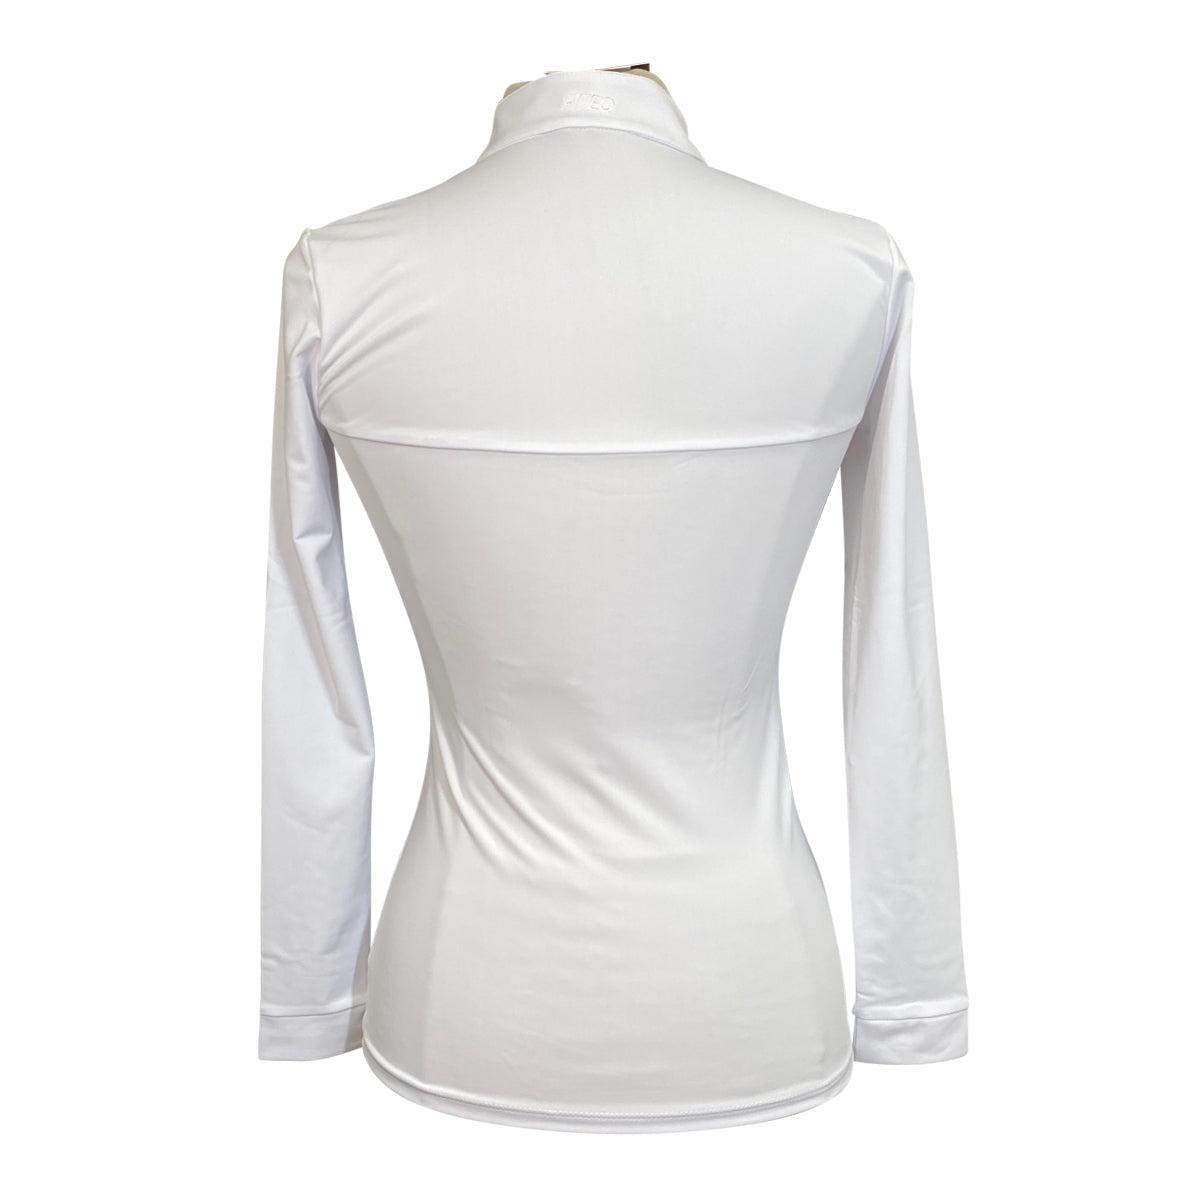 FitEq 'Bryce' Long Sleeve Show Shirt in White 